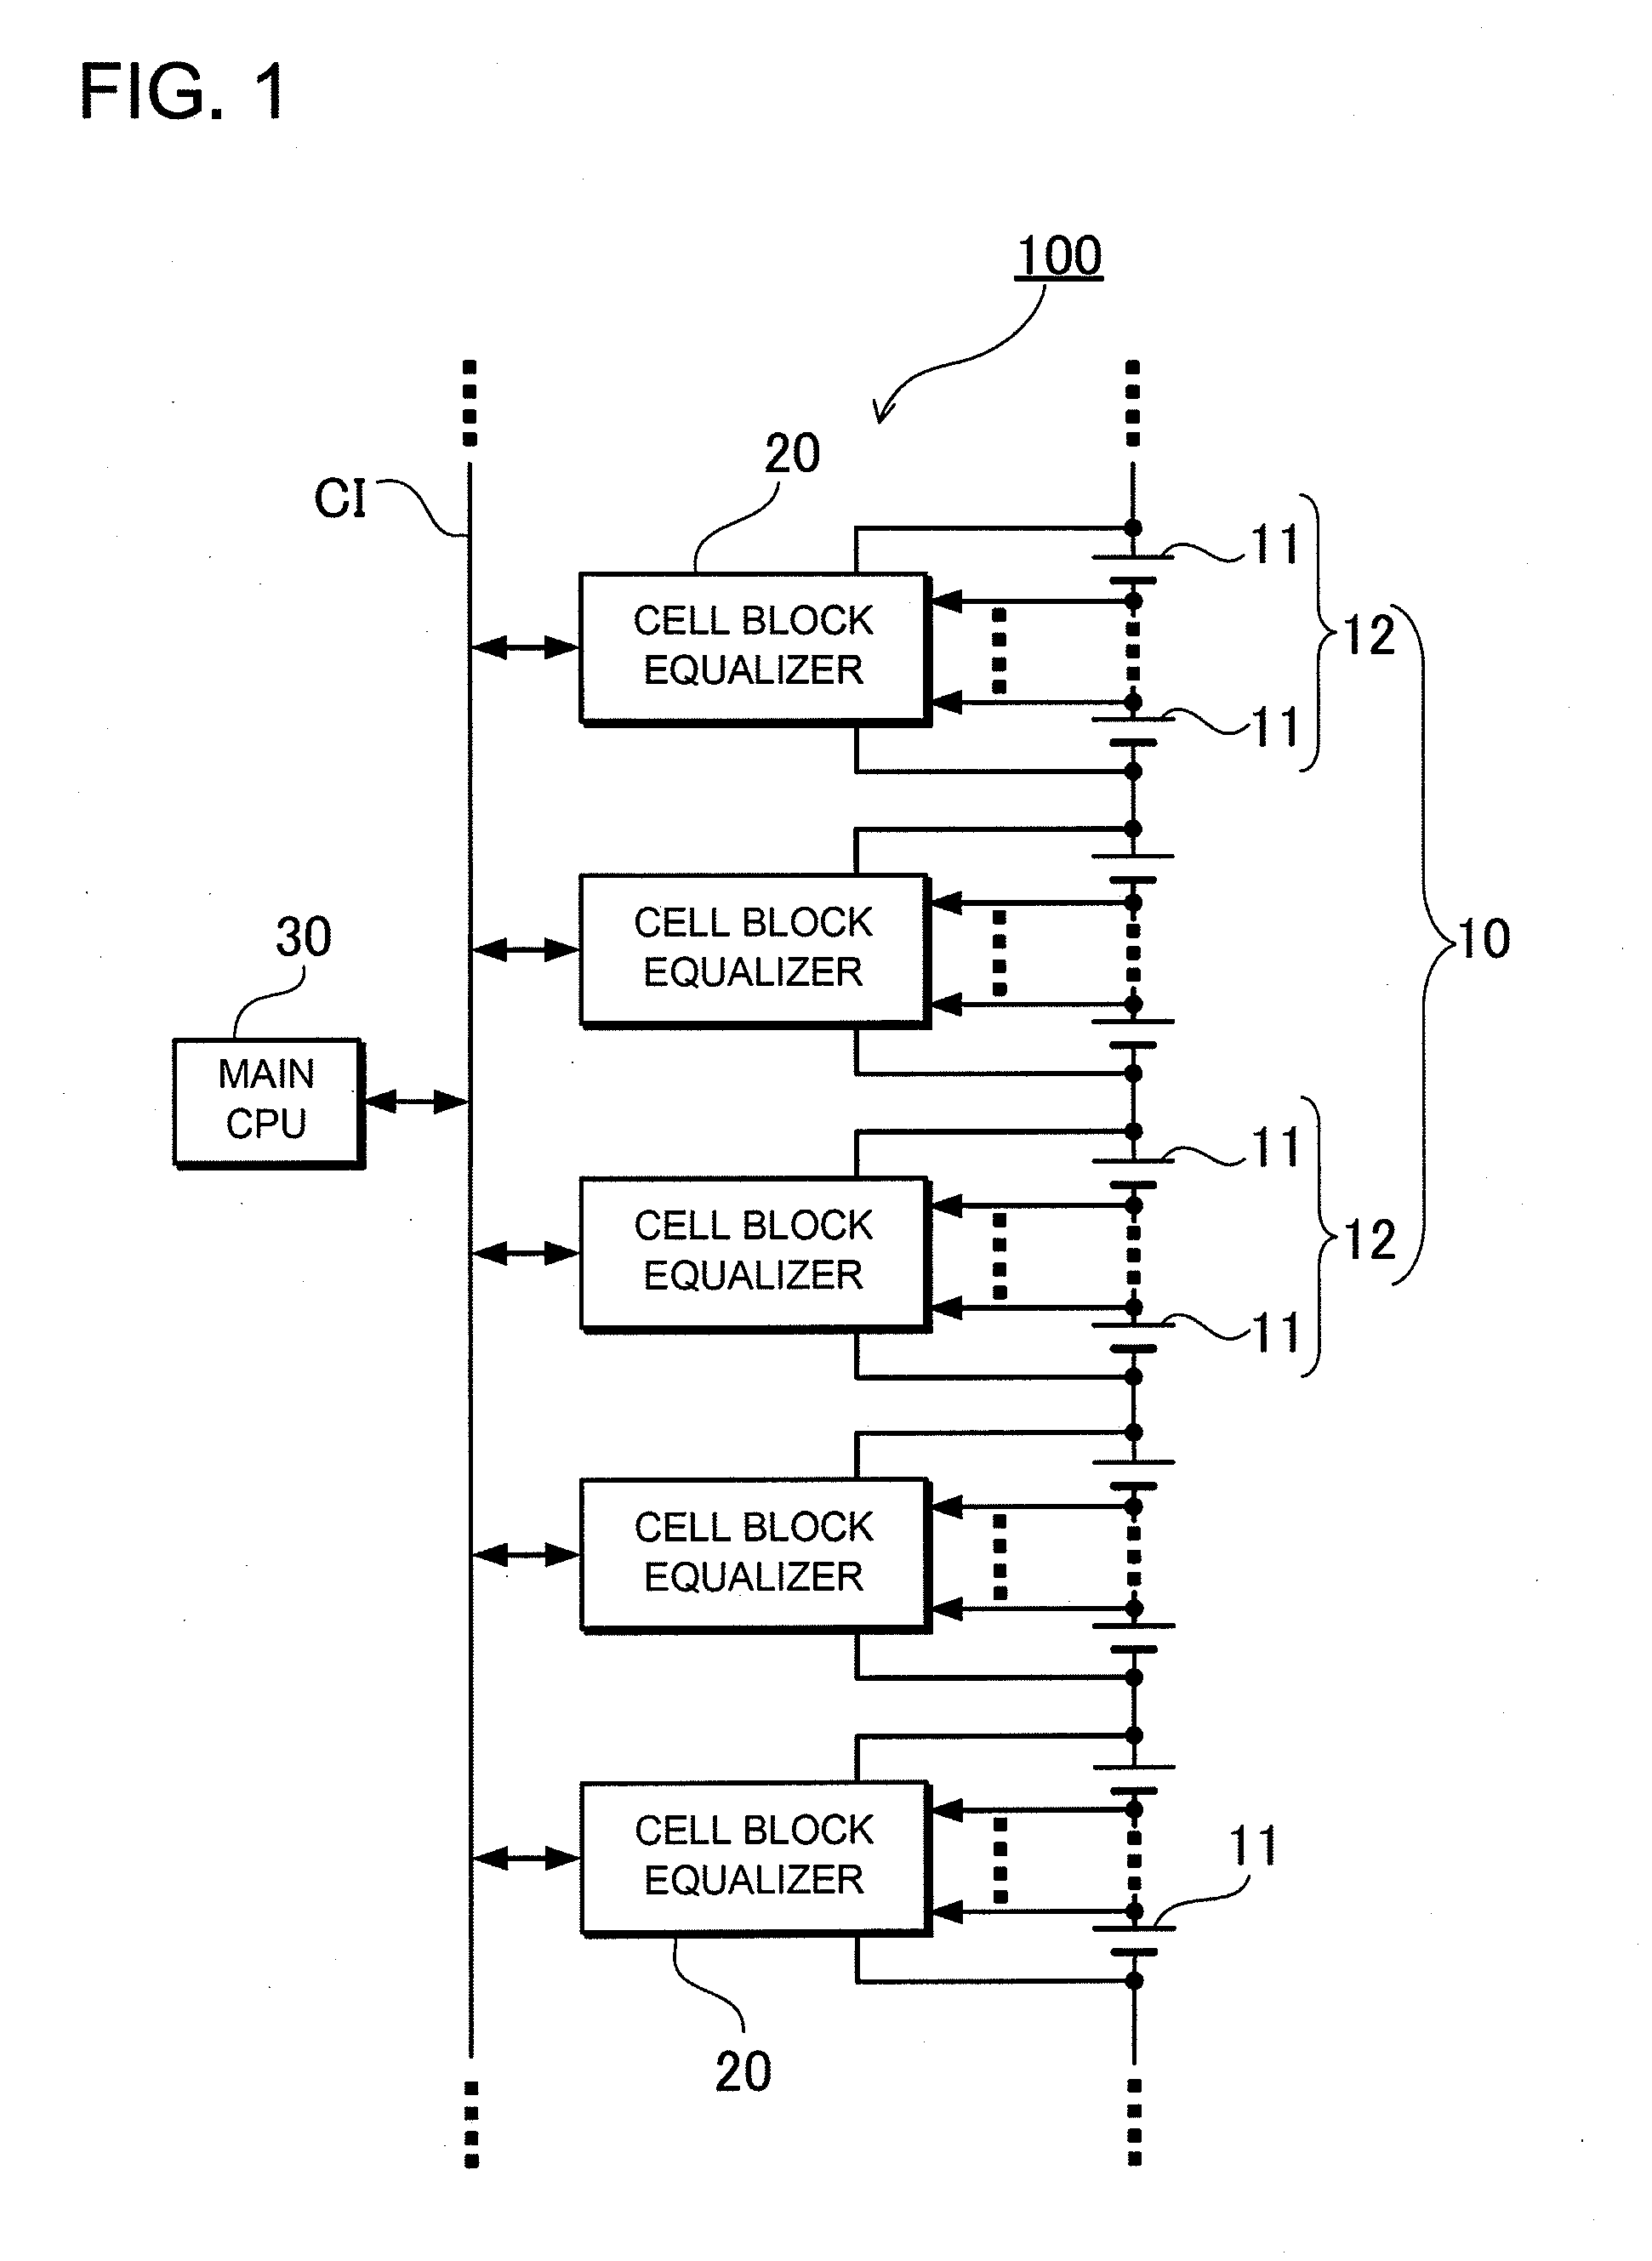 Power supply device capable of equalizing electrical properties of batteries